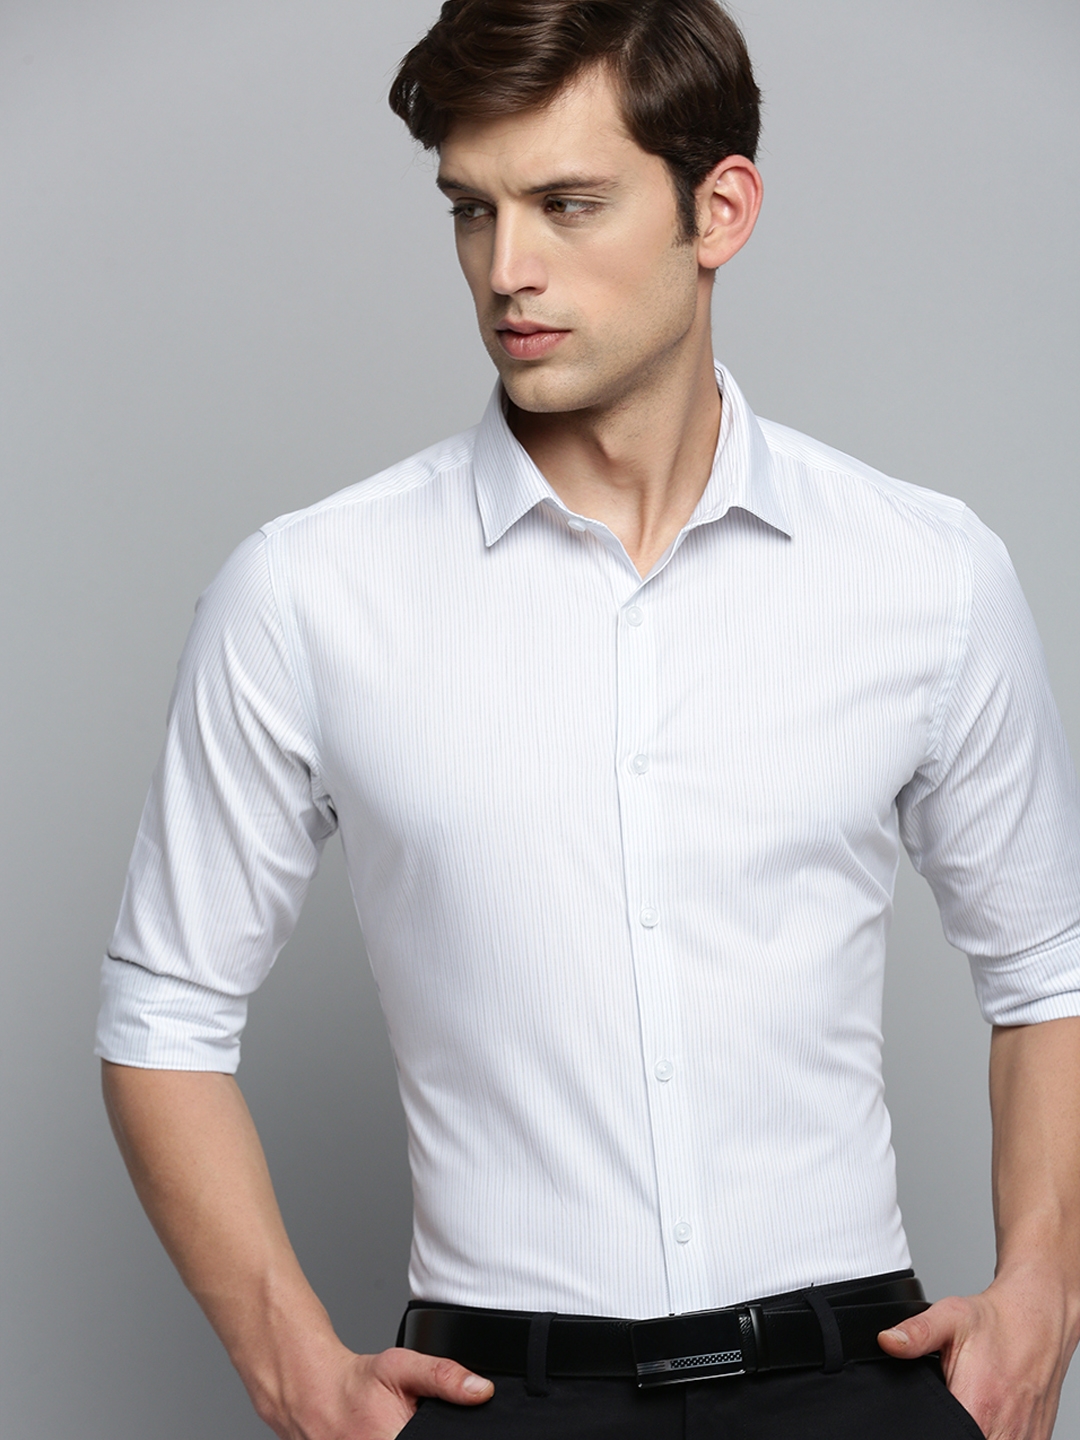 Showoff | SHOWOFF Men's Spread Collar Striped White Classic Shirt 0